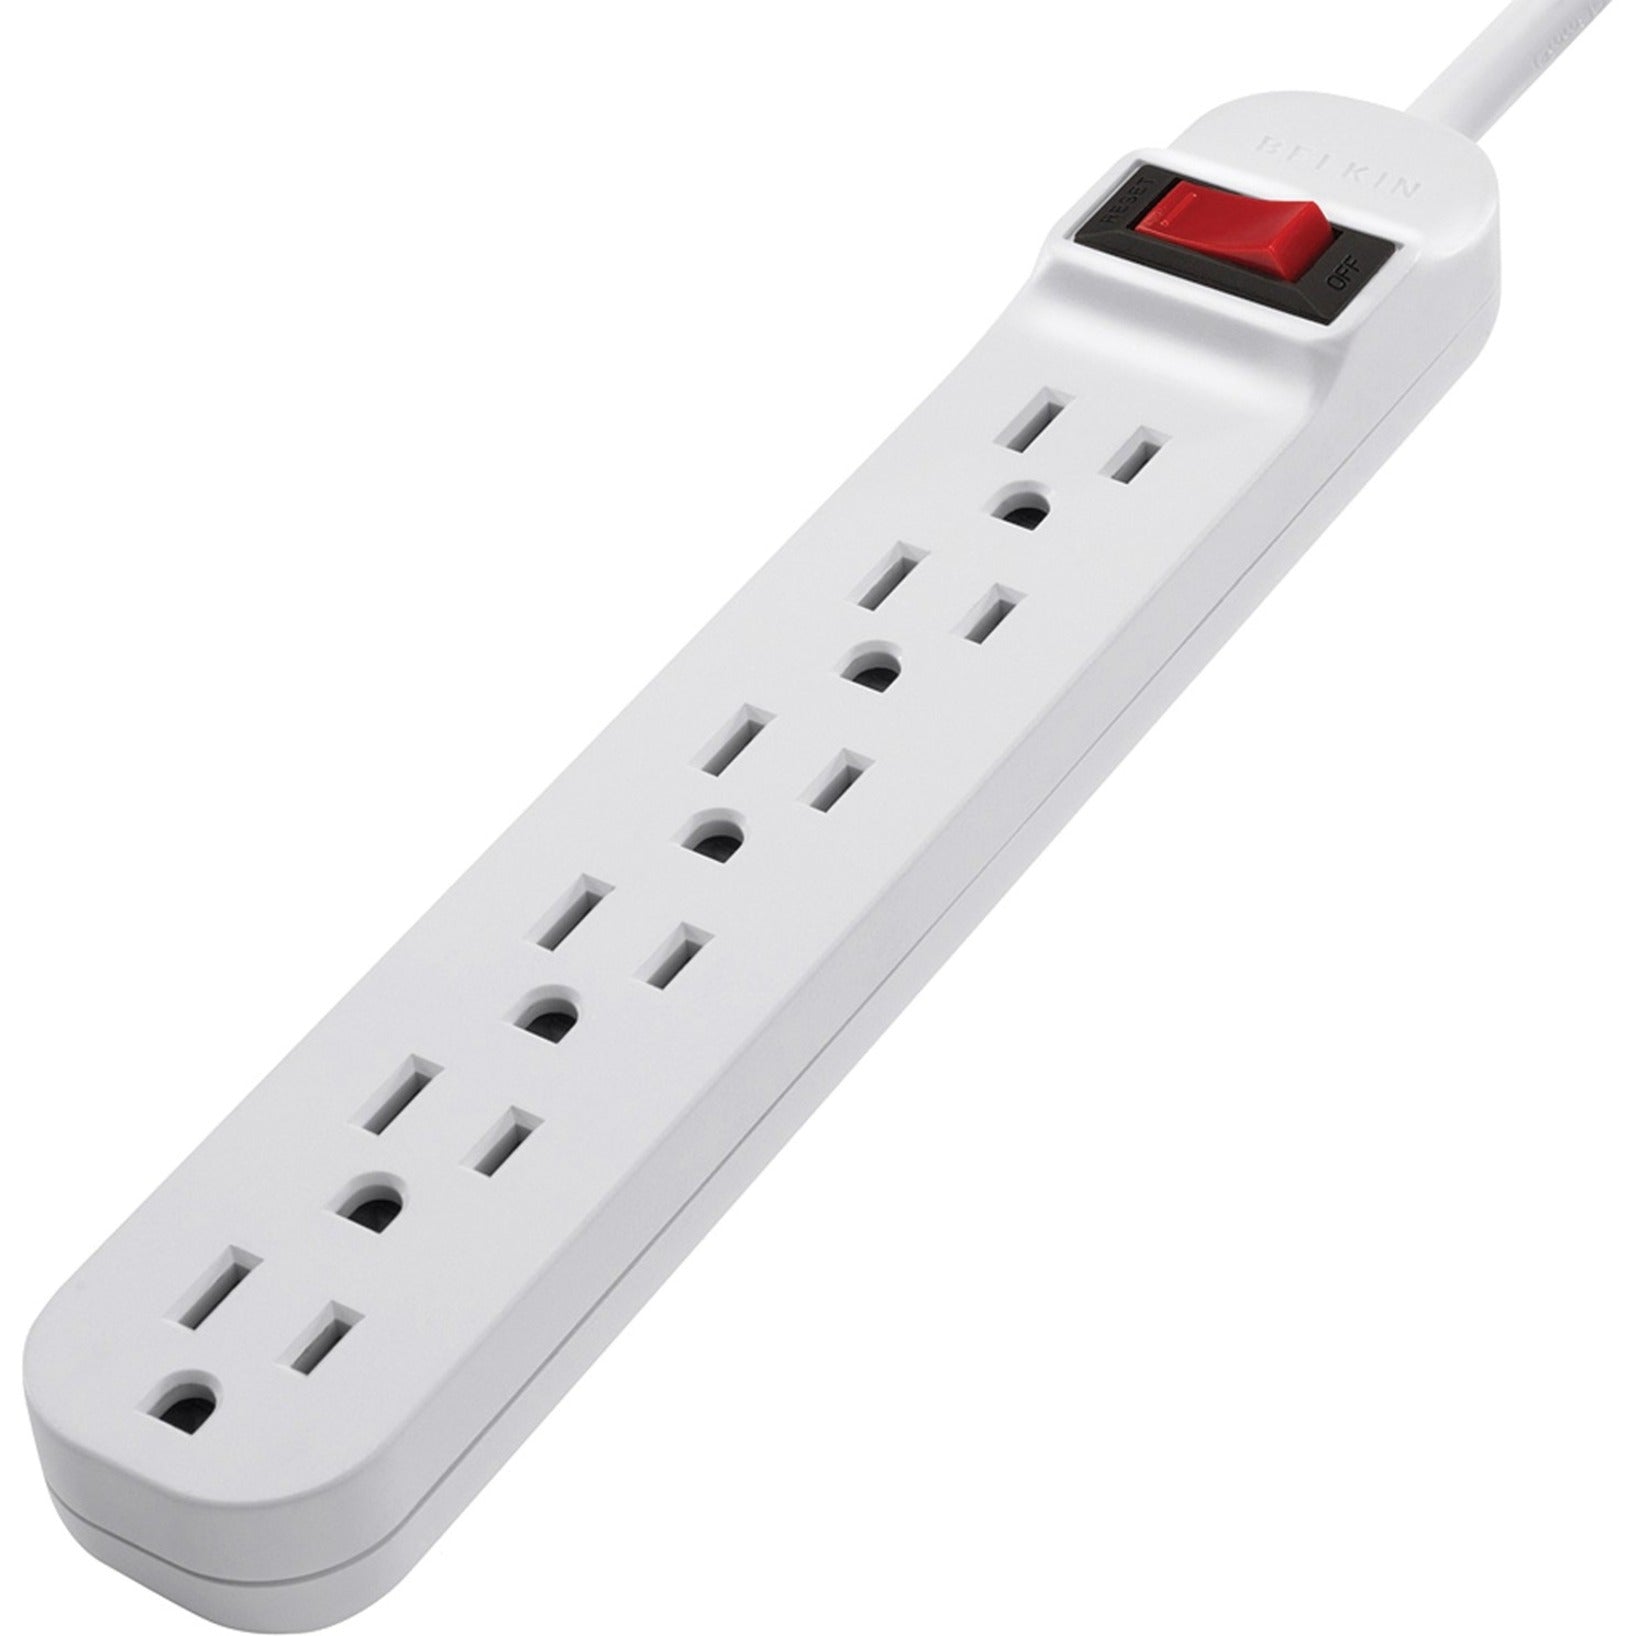 Belkin F9P609-03 6-Outlets Power Strip, 3 ft Cord, White